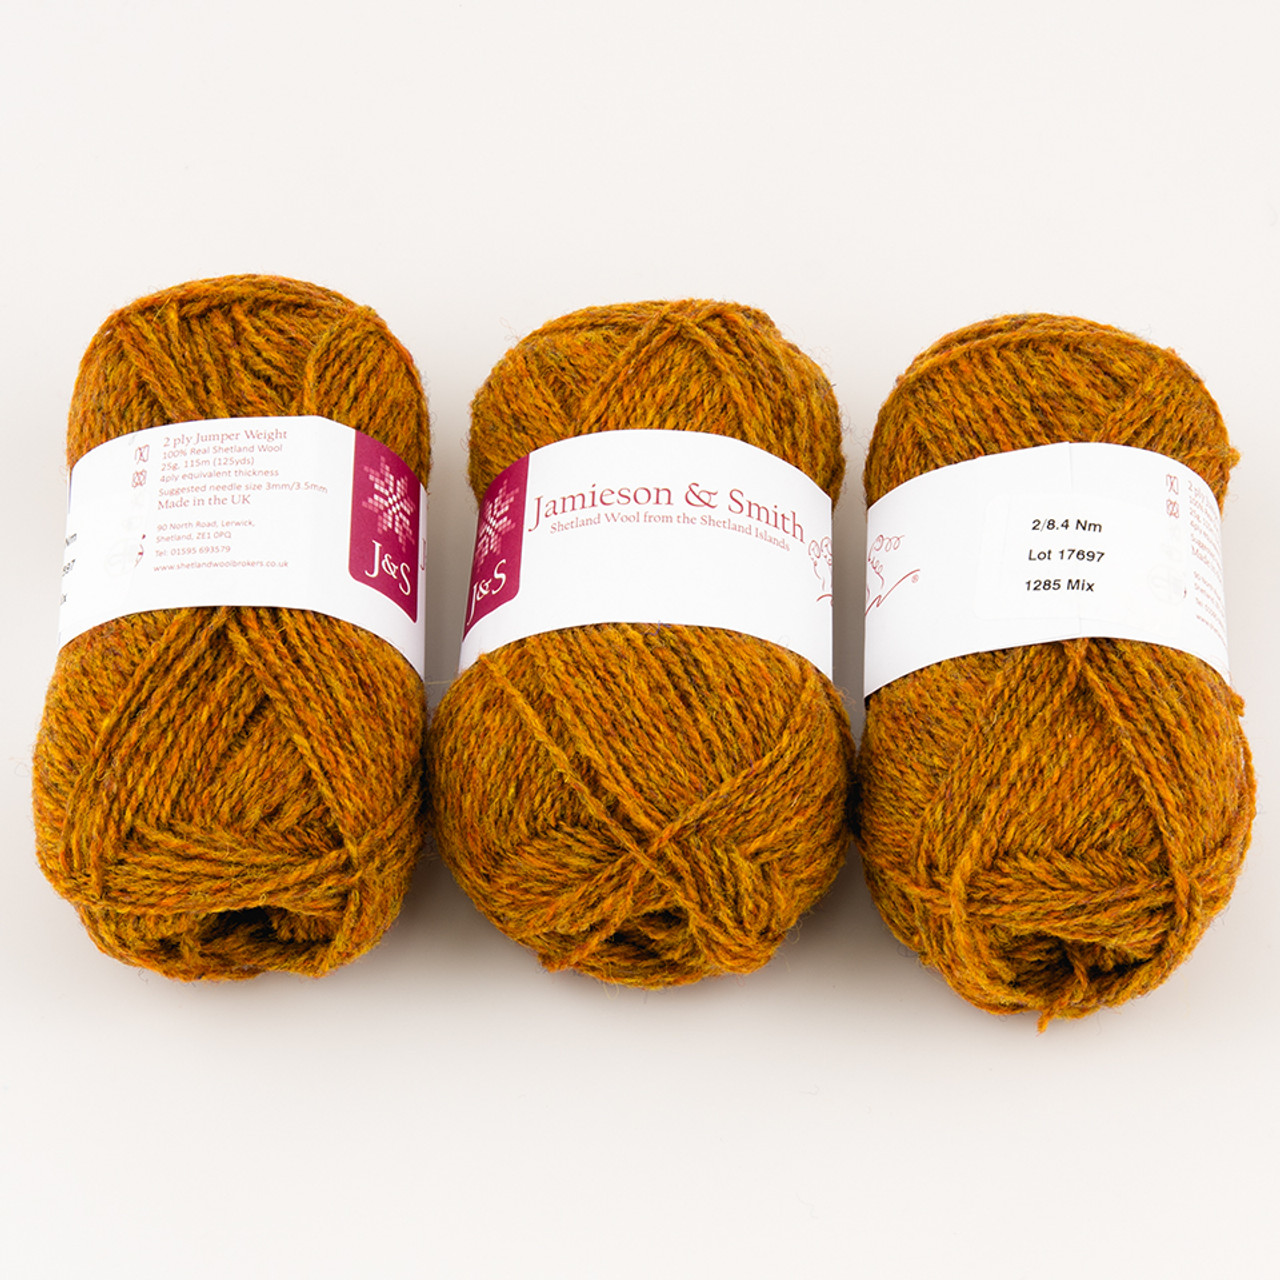 Jamieson & Smith, Jumper Weight // 1285 Mix at The Loopy Ewe